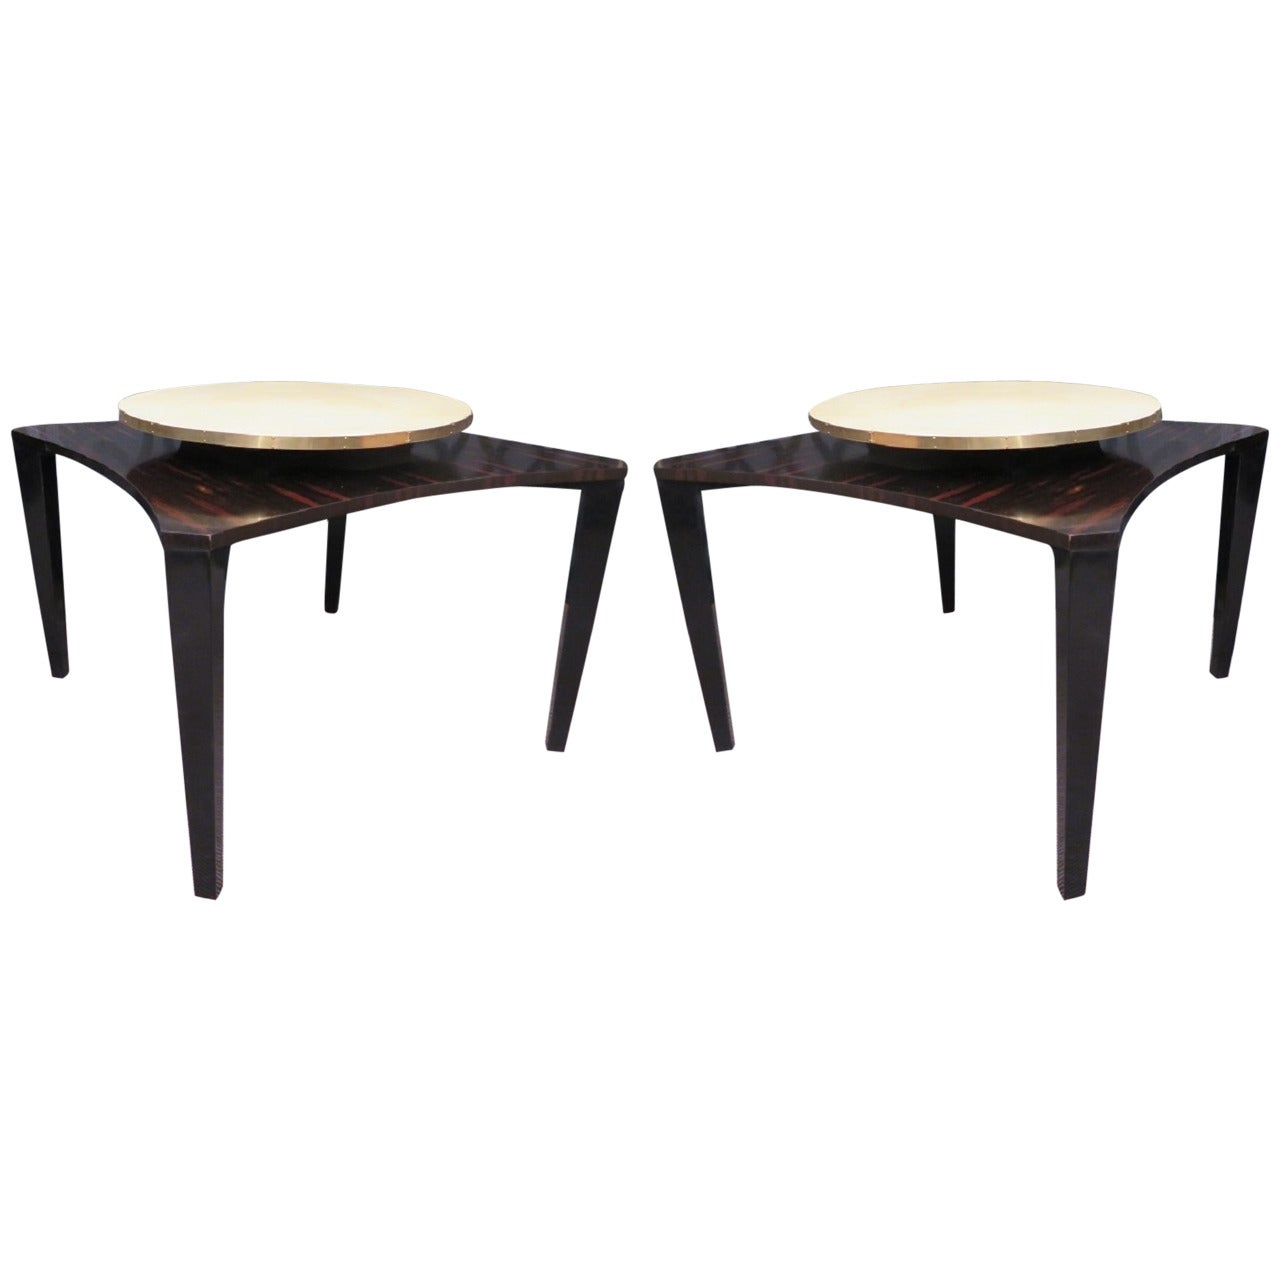 Couple of Side Tables